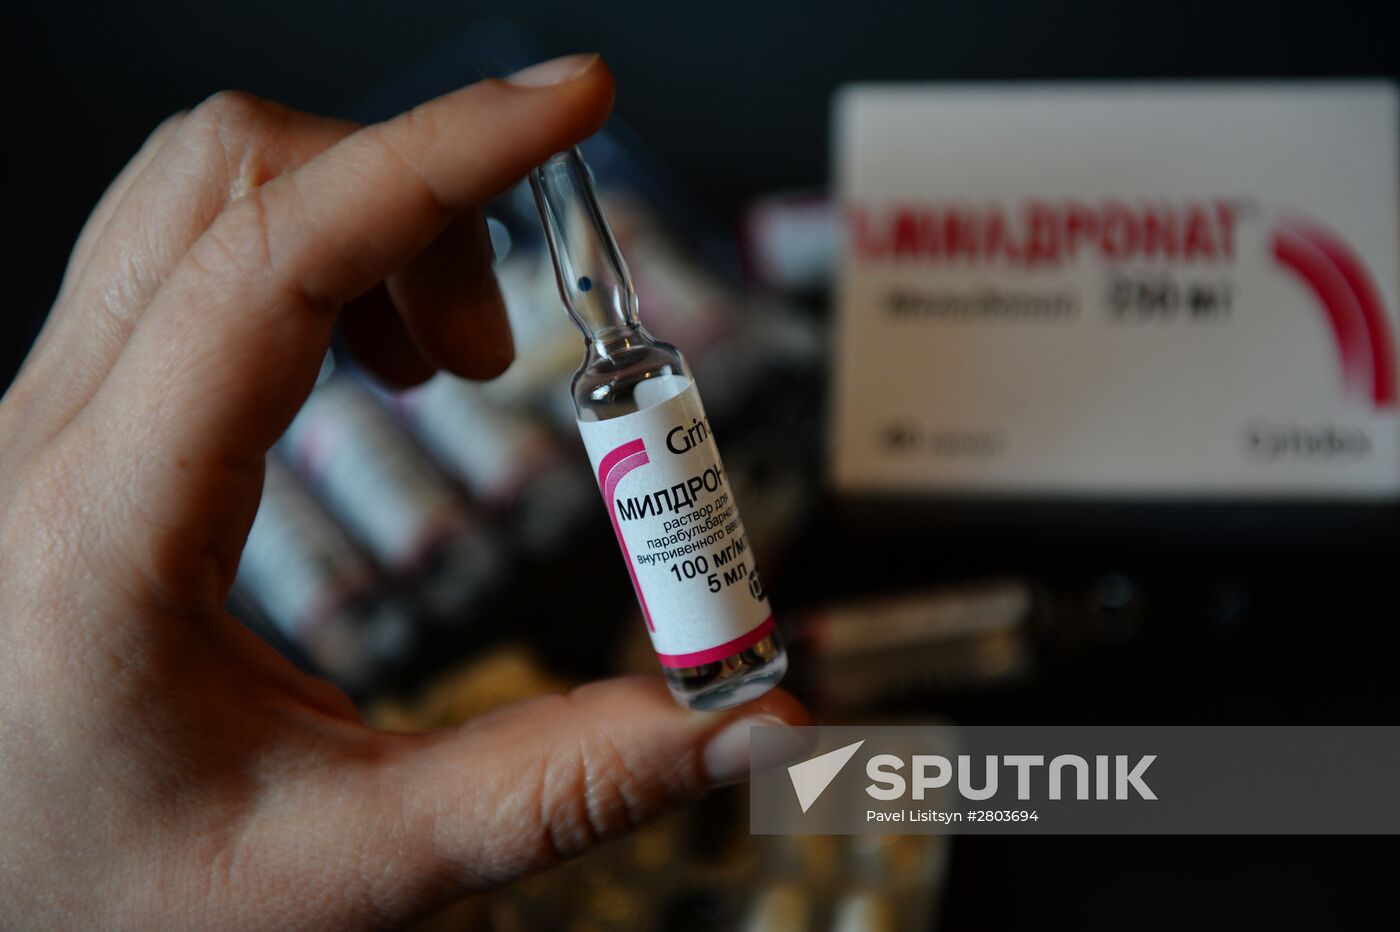 Meldonium banned by World Anti-Doping Agency